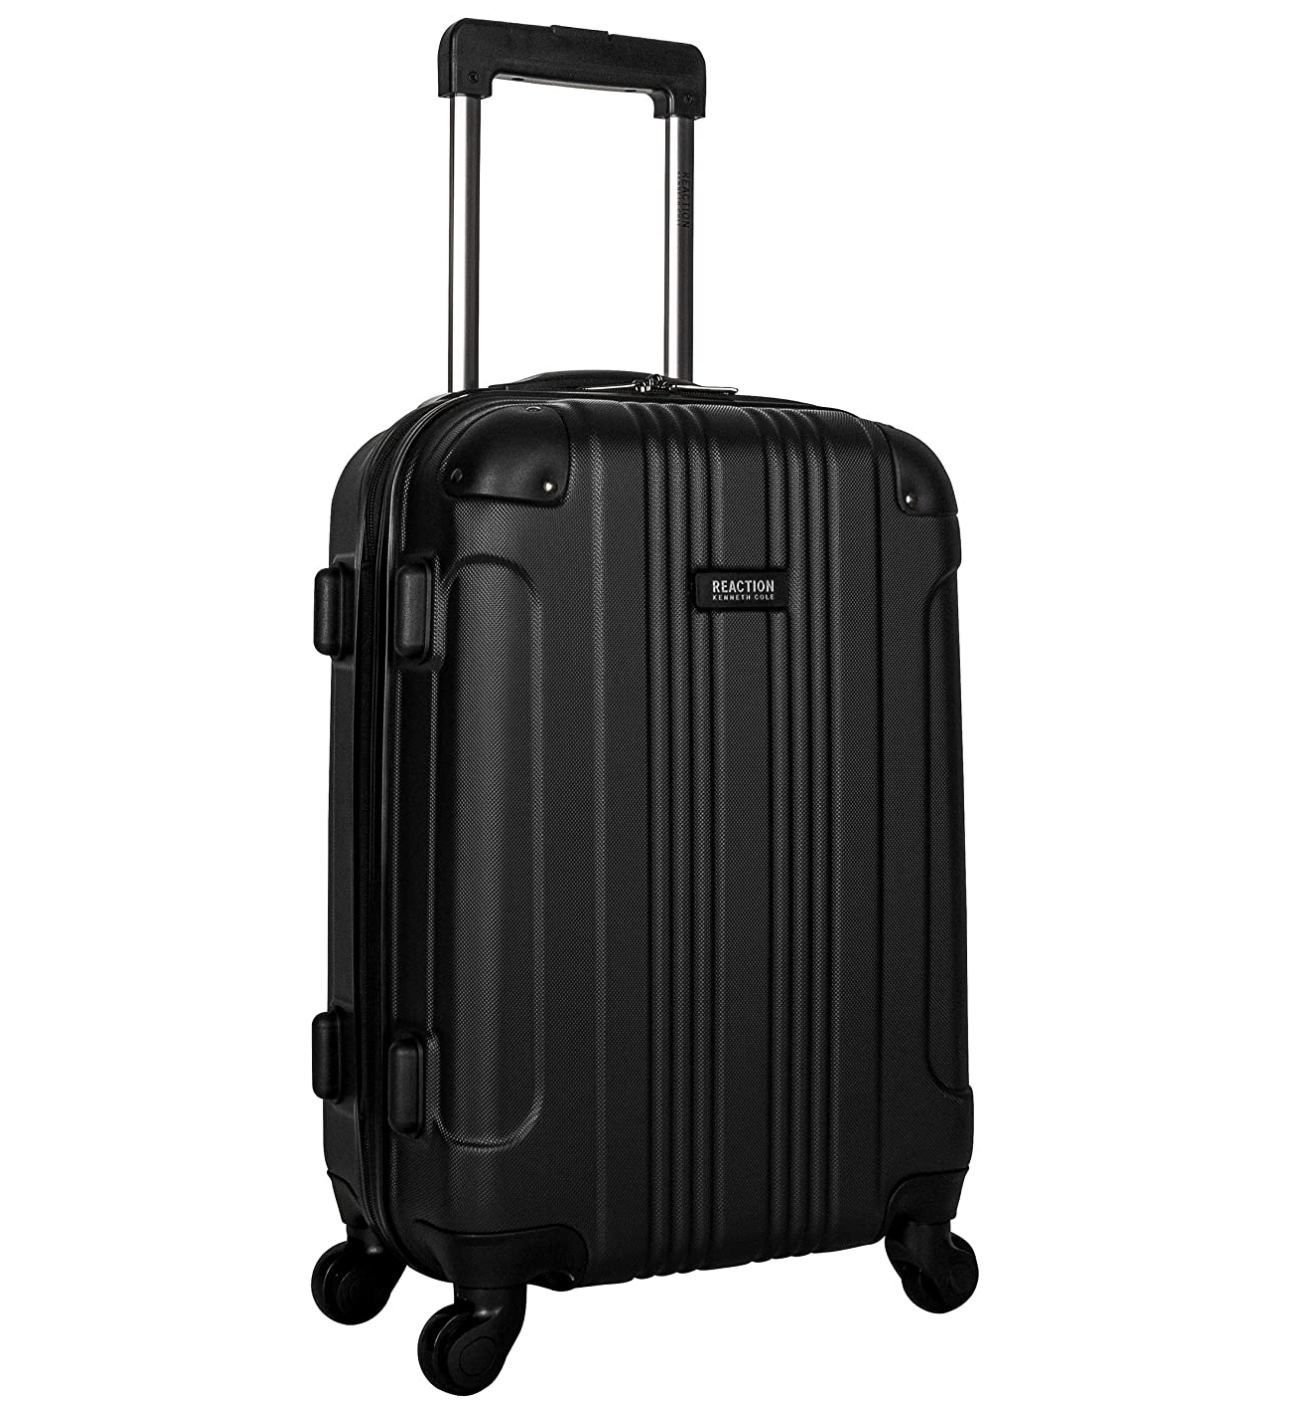 MHO Carry-On Spinner Luggage 20 Hardside Travel Bag Trolley Rolling Suitcase